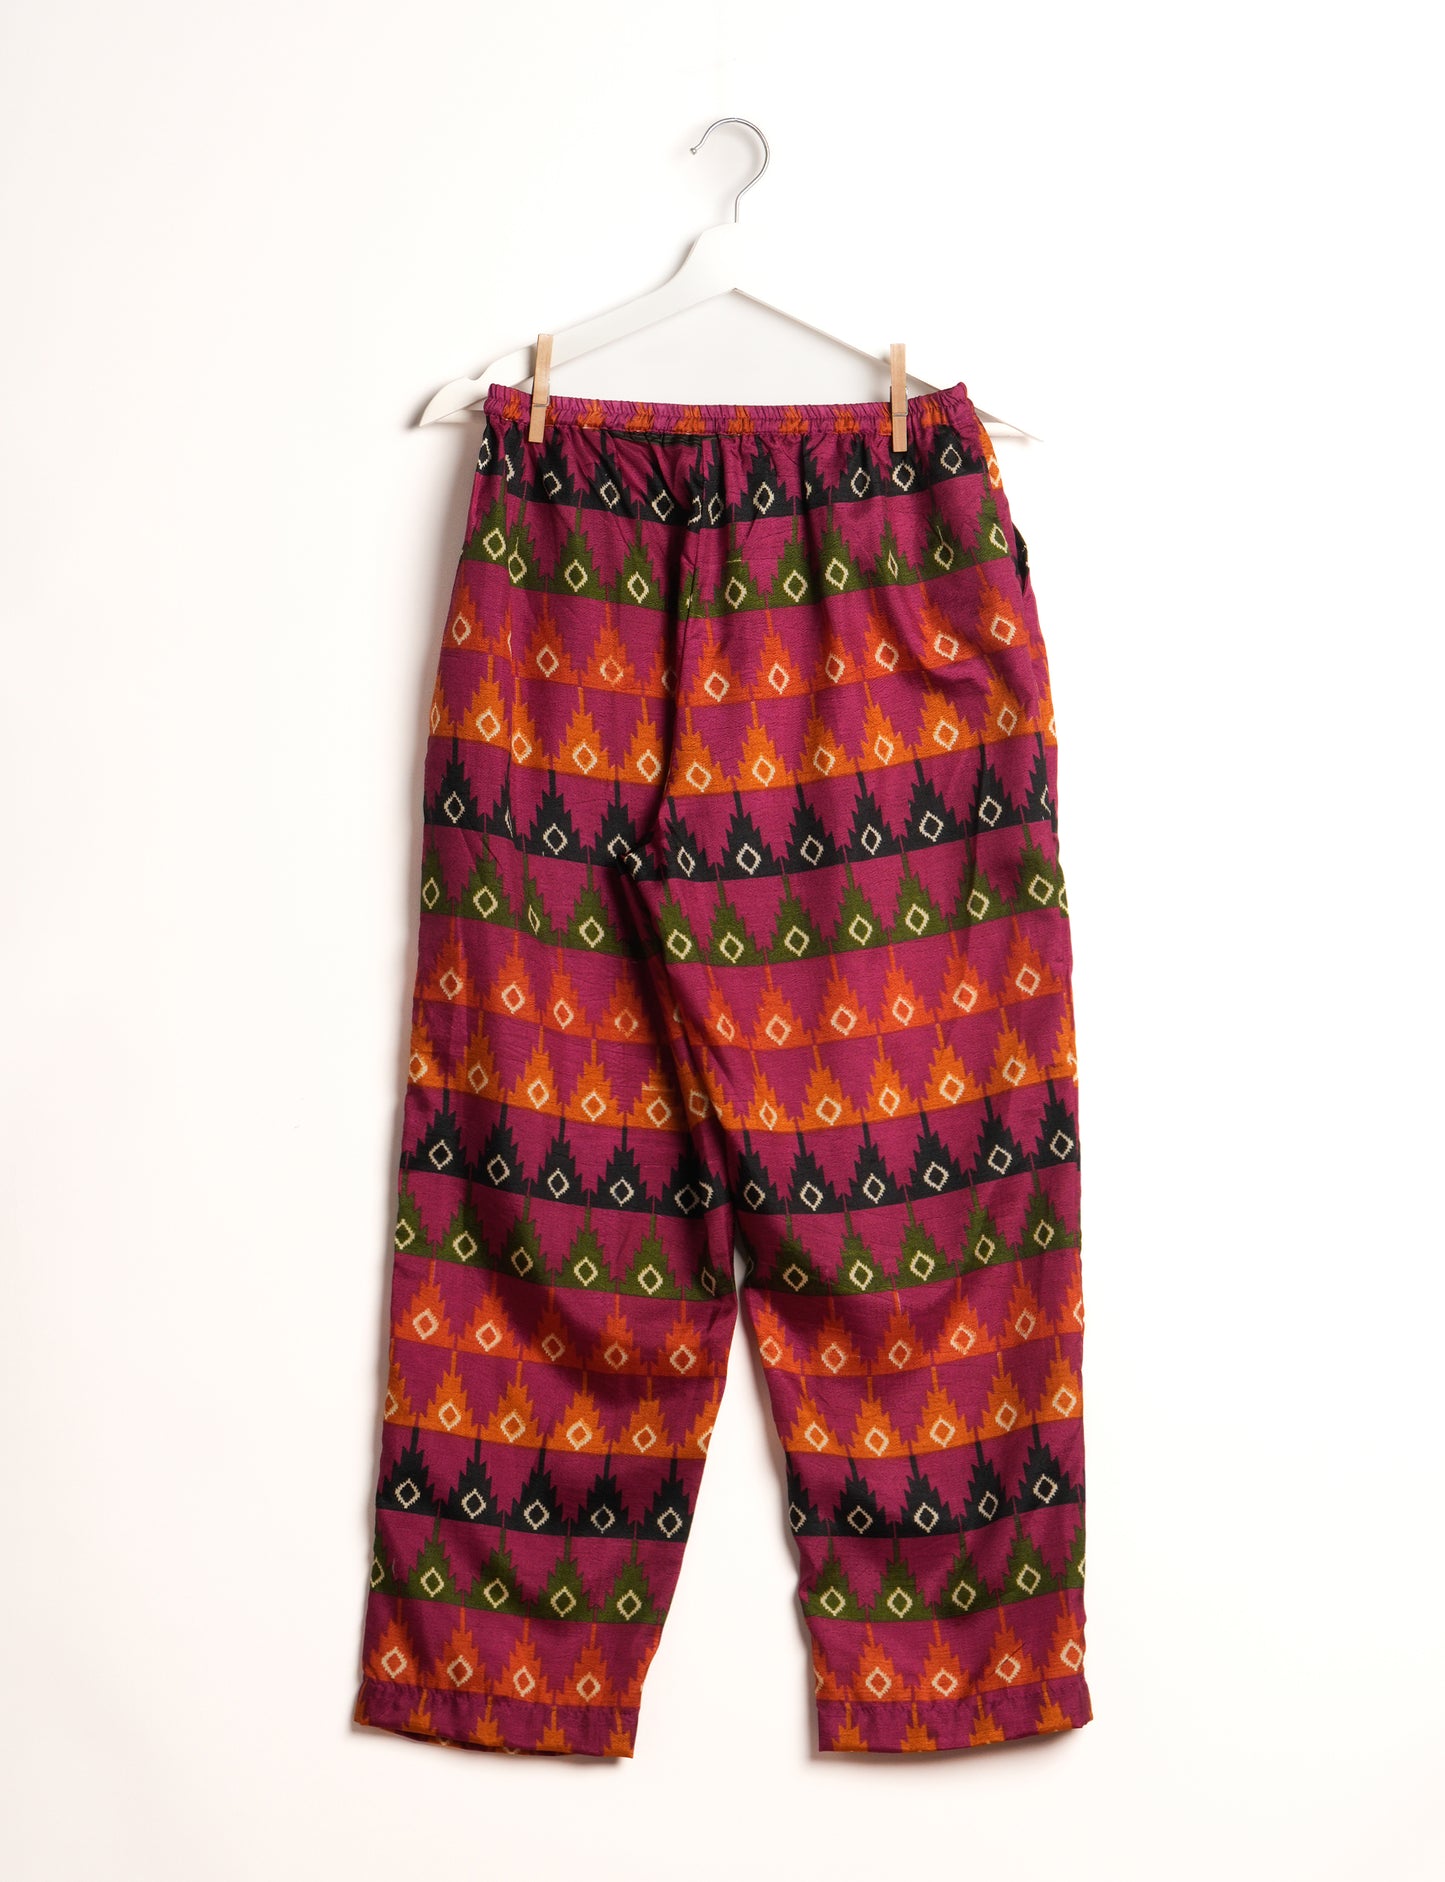 Elevate your wardrobe with our planet-friendly PULL-ON PANTS. Made from upcycled sari fabric, these eco-conscious pants offer a drawstring waist for a perfect fit. Tapered leg design ensures both style and comfort. Choose ethical, green fashion that supports artisans and sustainable living.